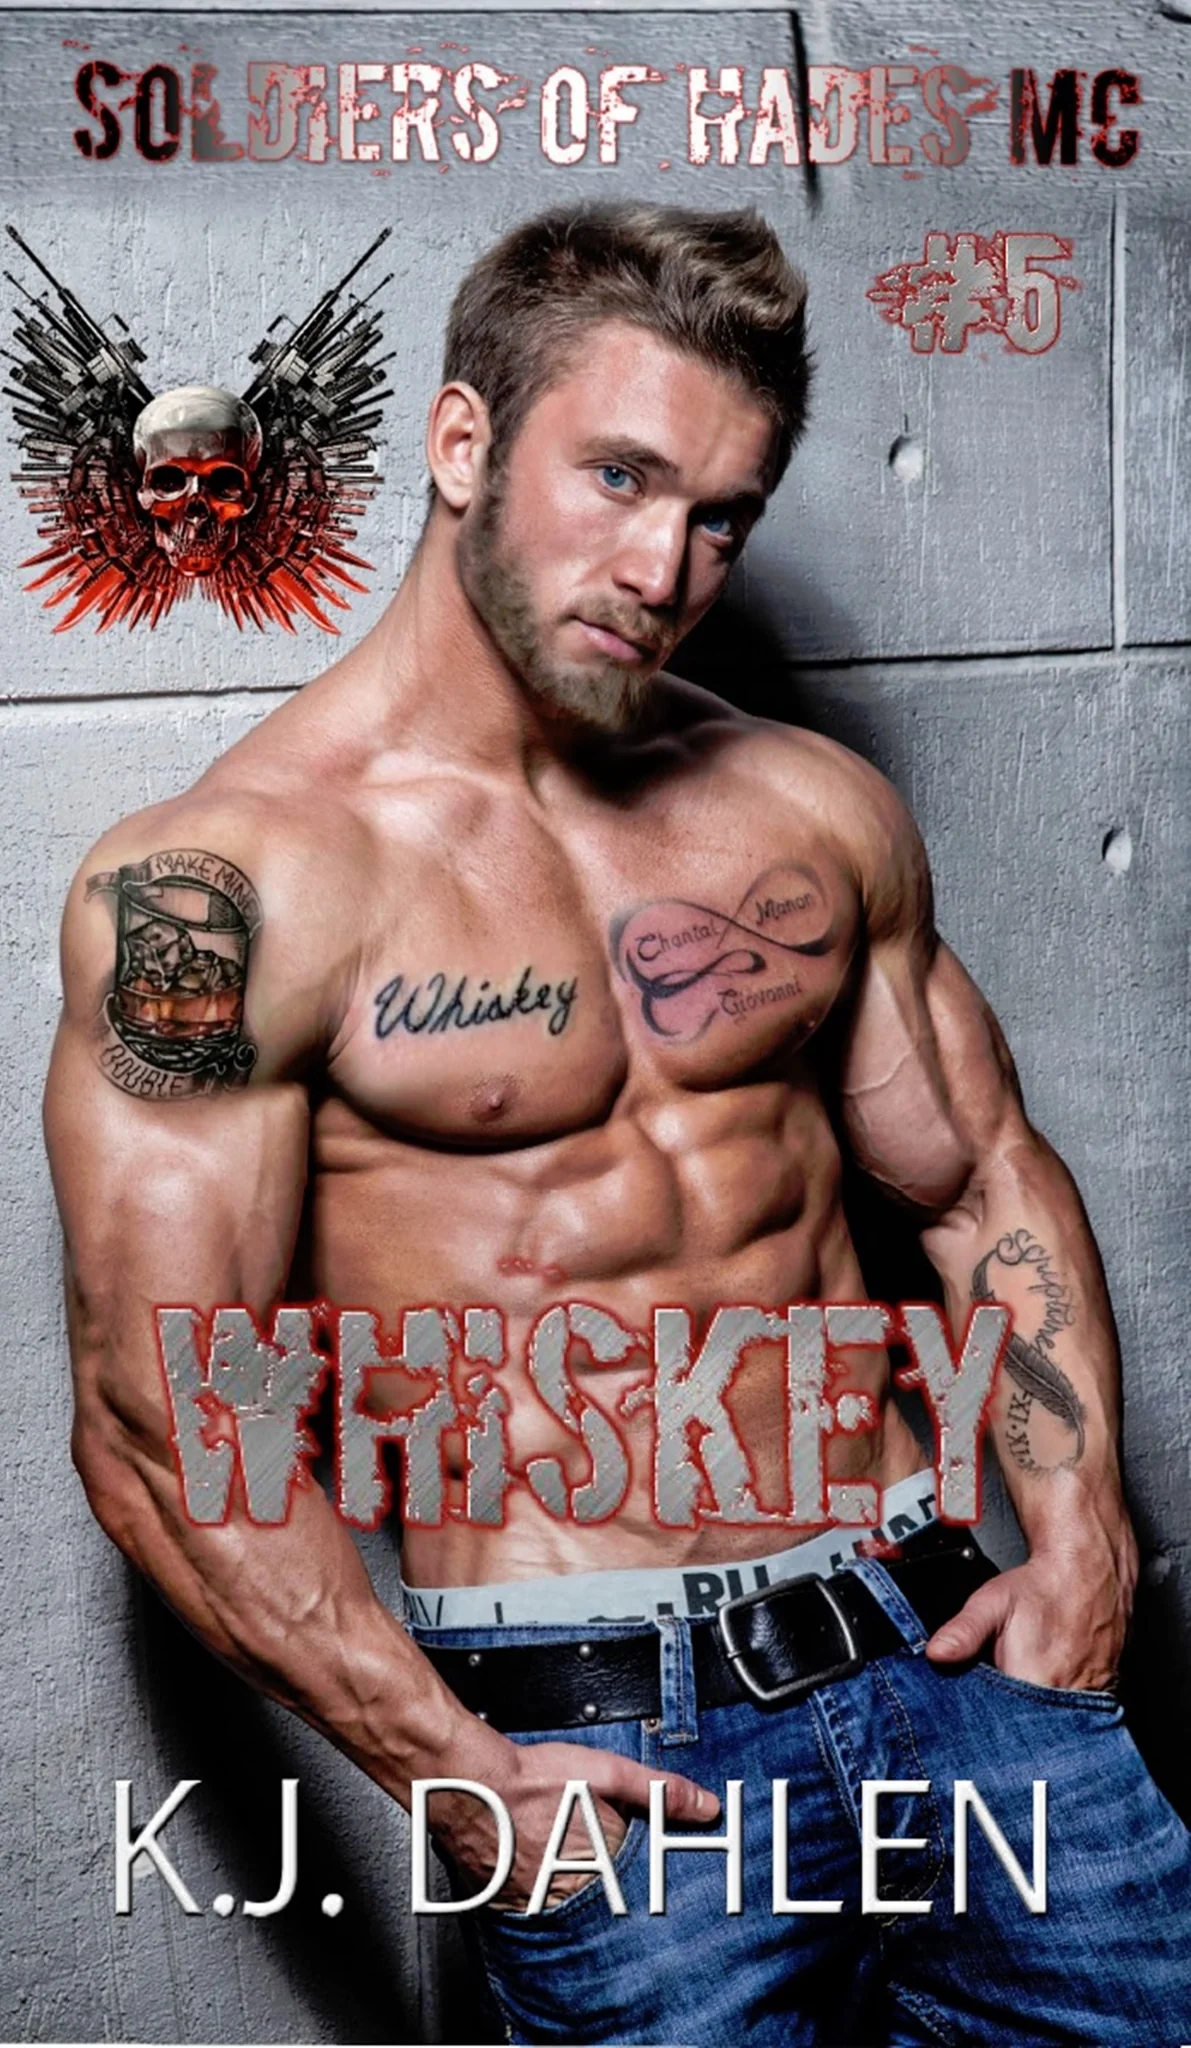 Whiskey: Soldiers Of Hades MC, #5